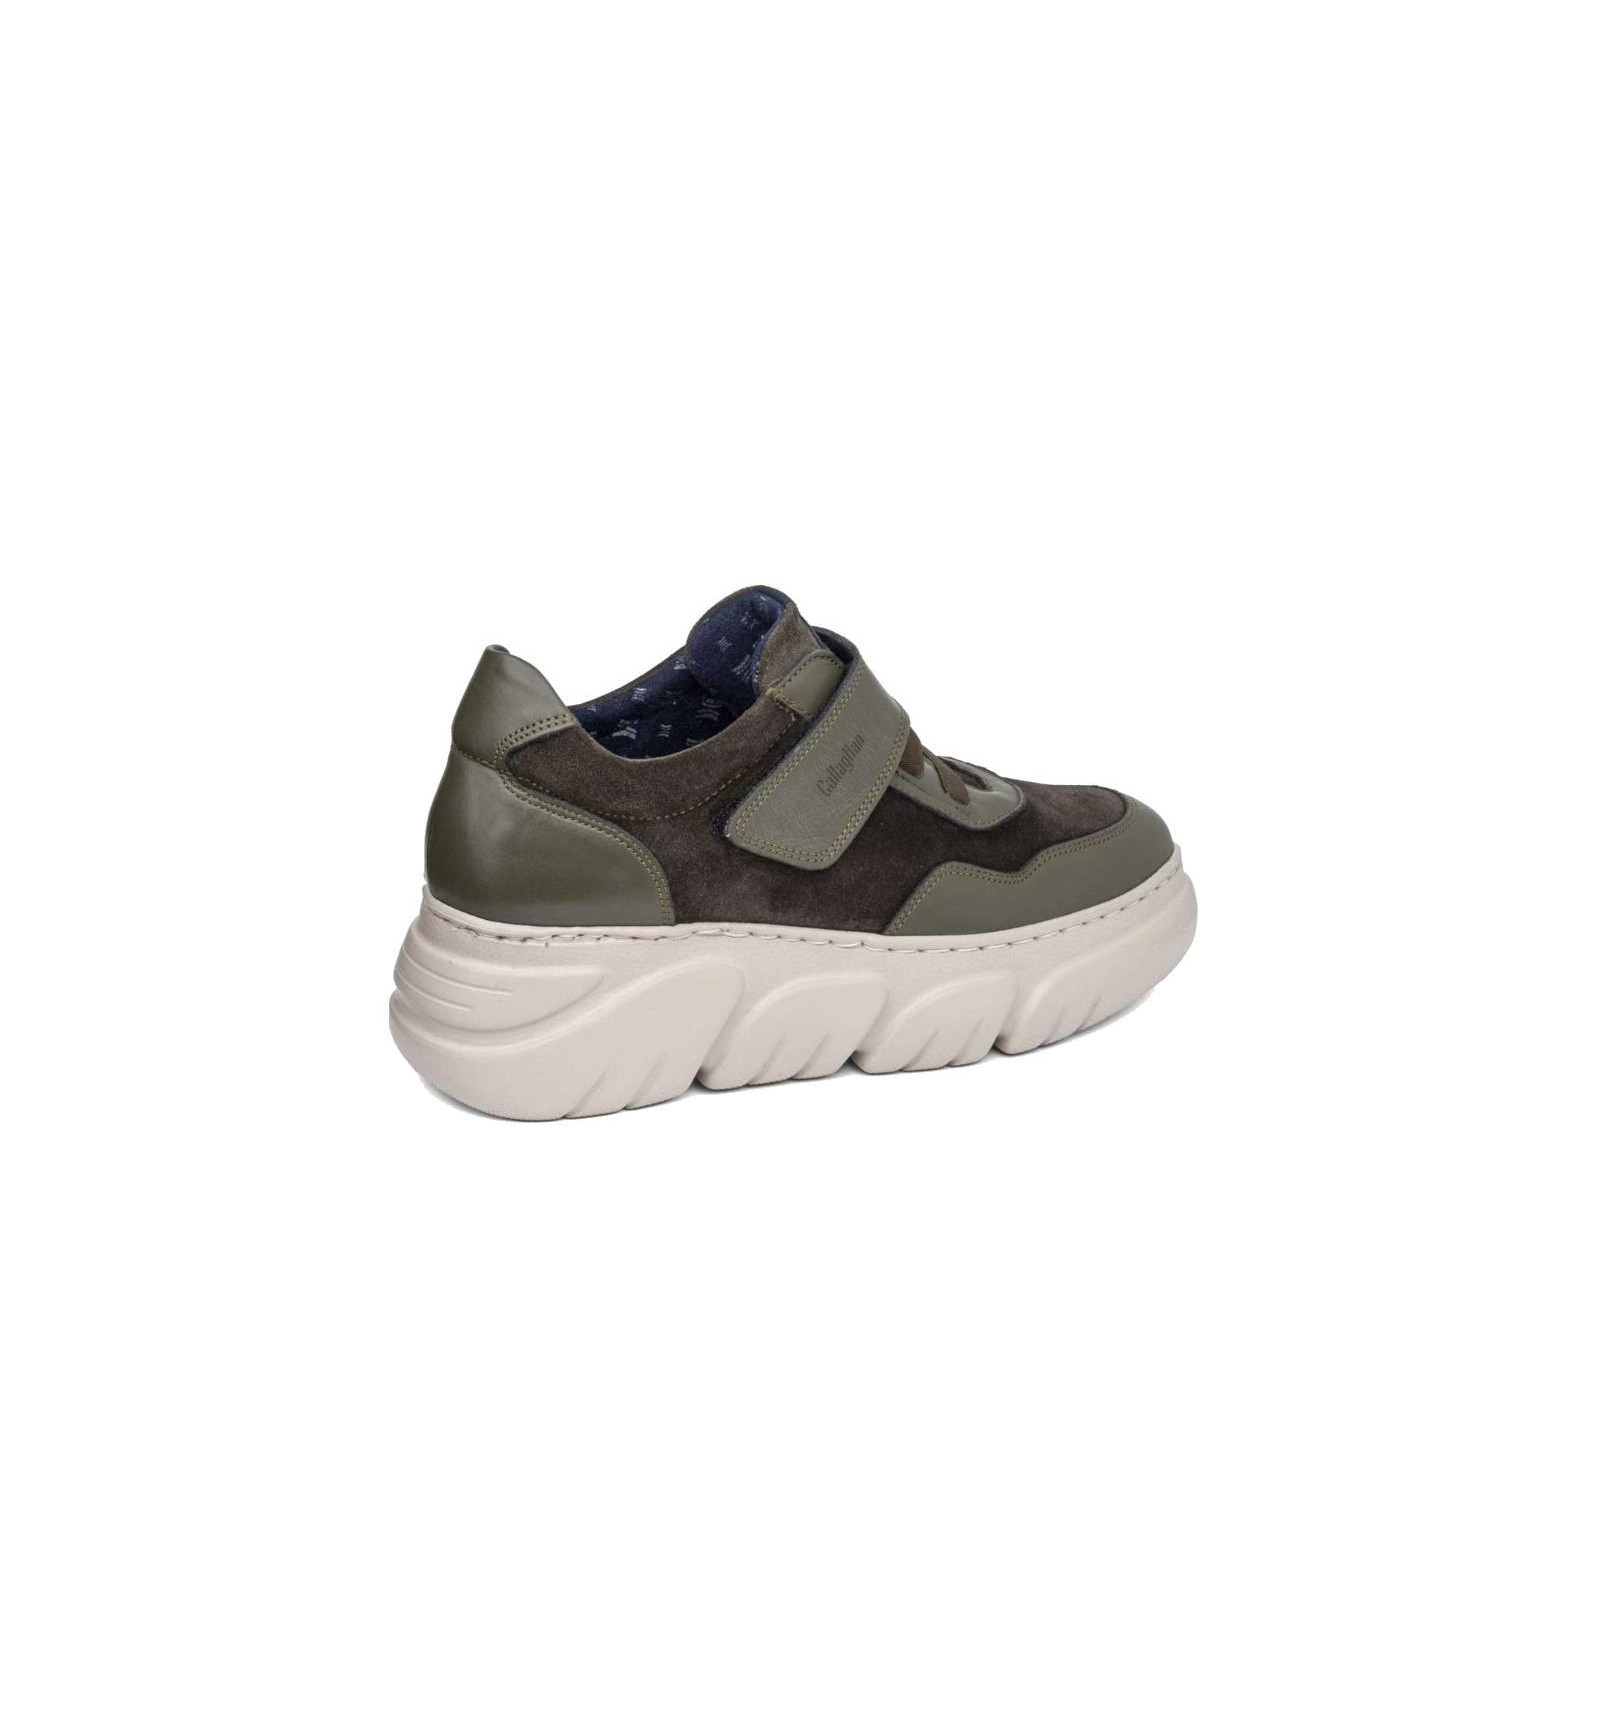 Callaghan coleccion sneakers mujer